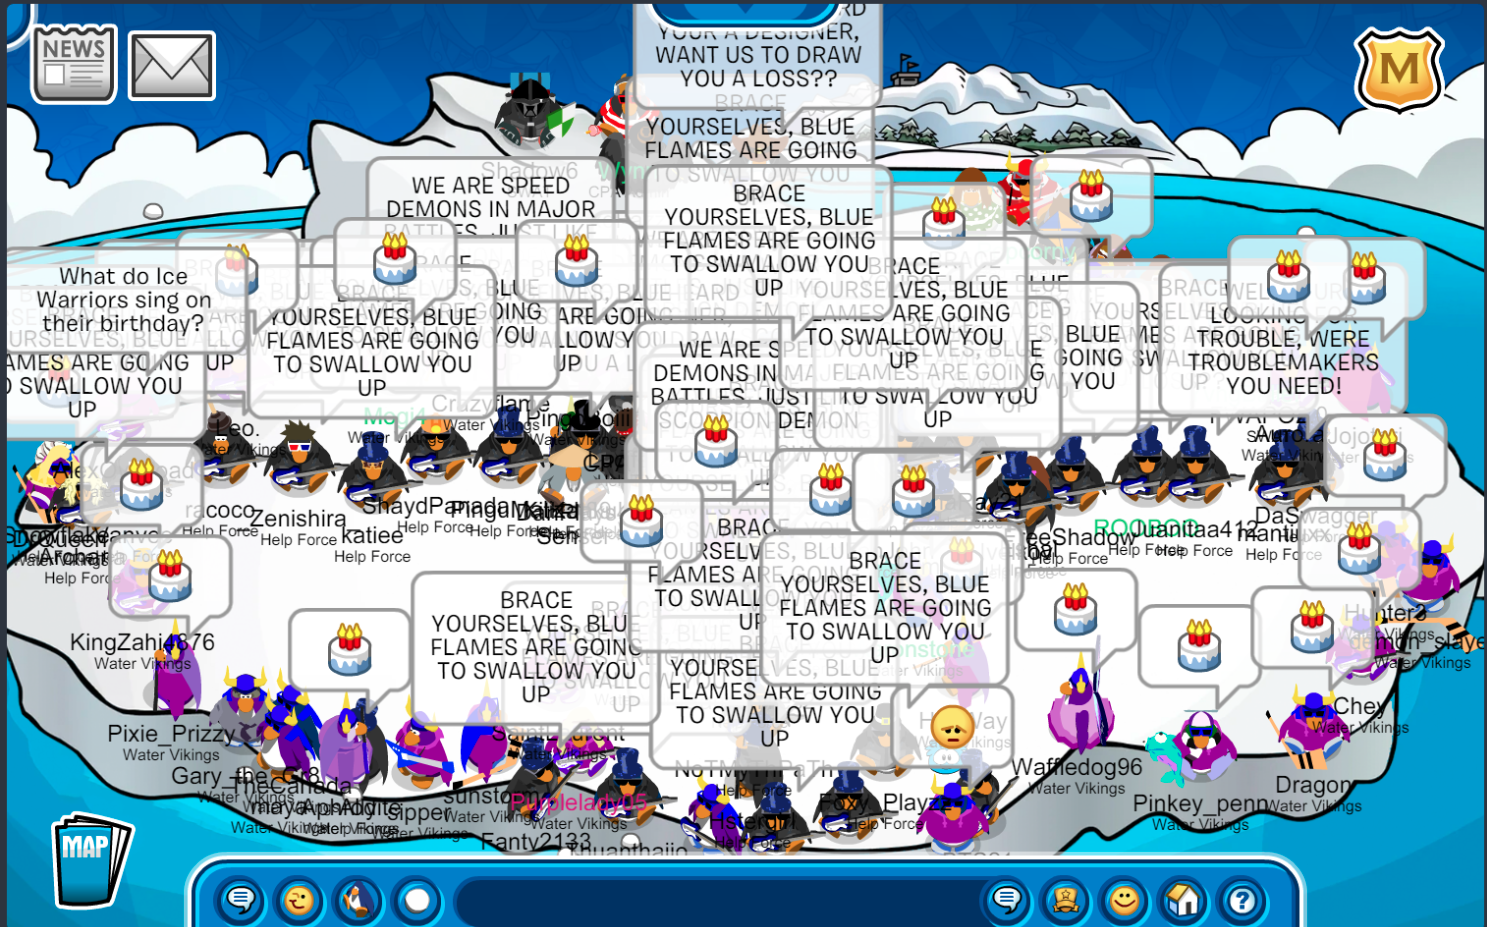 Two Club Penguin Armies, Help Force and Water Vikings, battle it out in the AUSIA Arena: Summer Edition grand finals. Help Force are in a plus shape whereas Water Vikings are in an infinity sign. Help Force are doing a word tactic that reads: "BRACE YOURSELVES, BLUE FLAMES ARE GOING TO SWALLOW YOU UP" whereas Water Vikings are doing E + K, showcasing an emote of a cake.